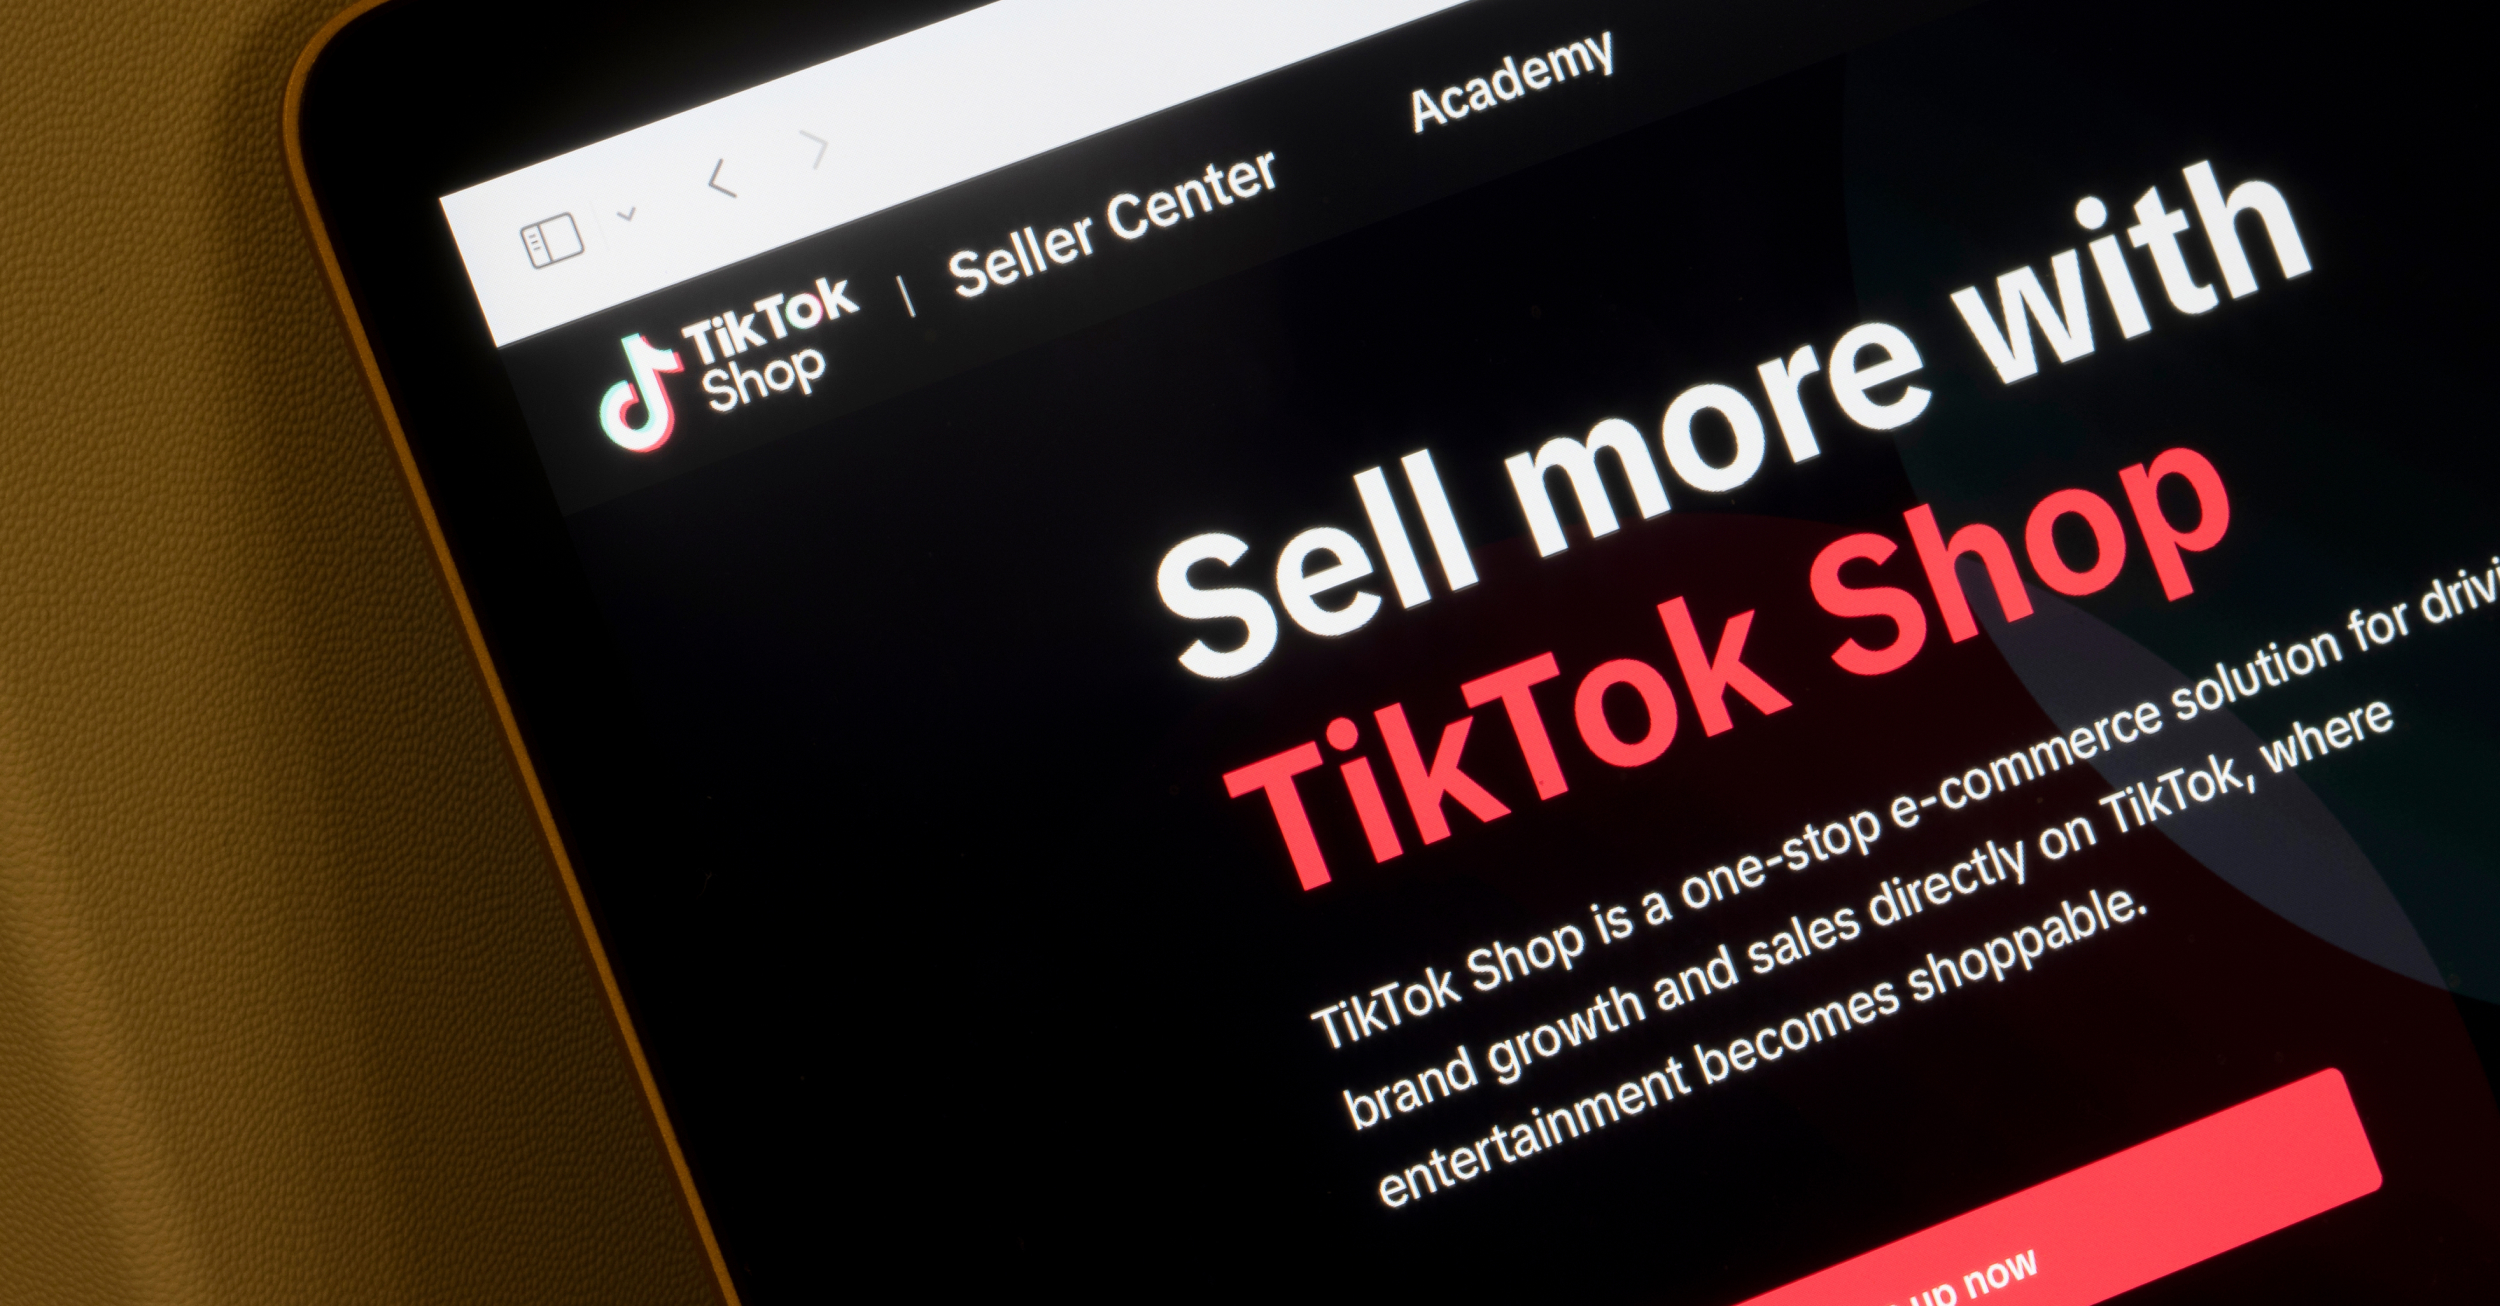 https://flow.space/wp-content/uploads/2024/01/The-Fulfillment-Guide-for-TikTok-Shop-Sellers-1.jpg